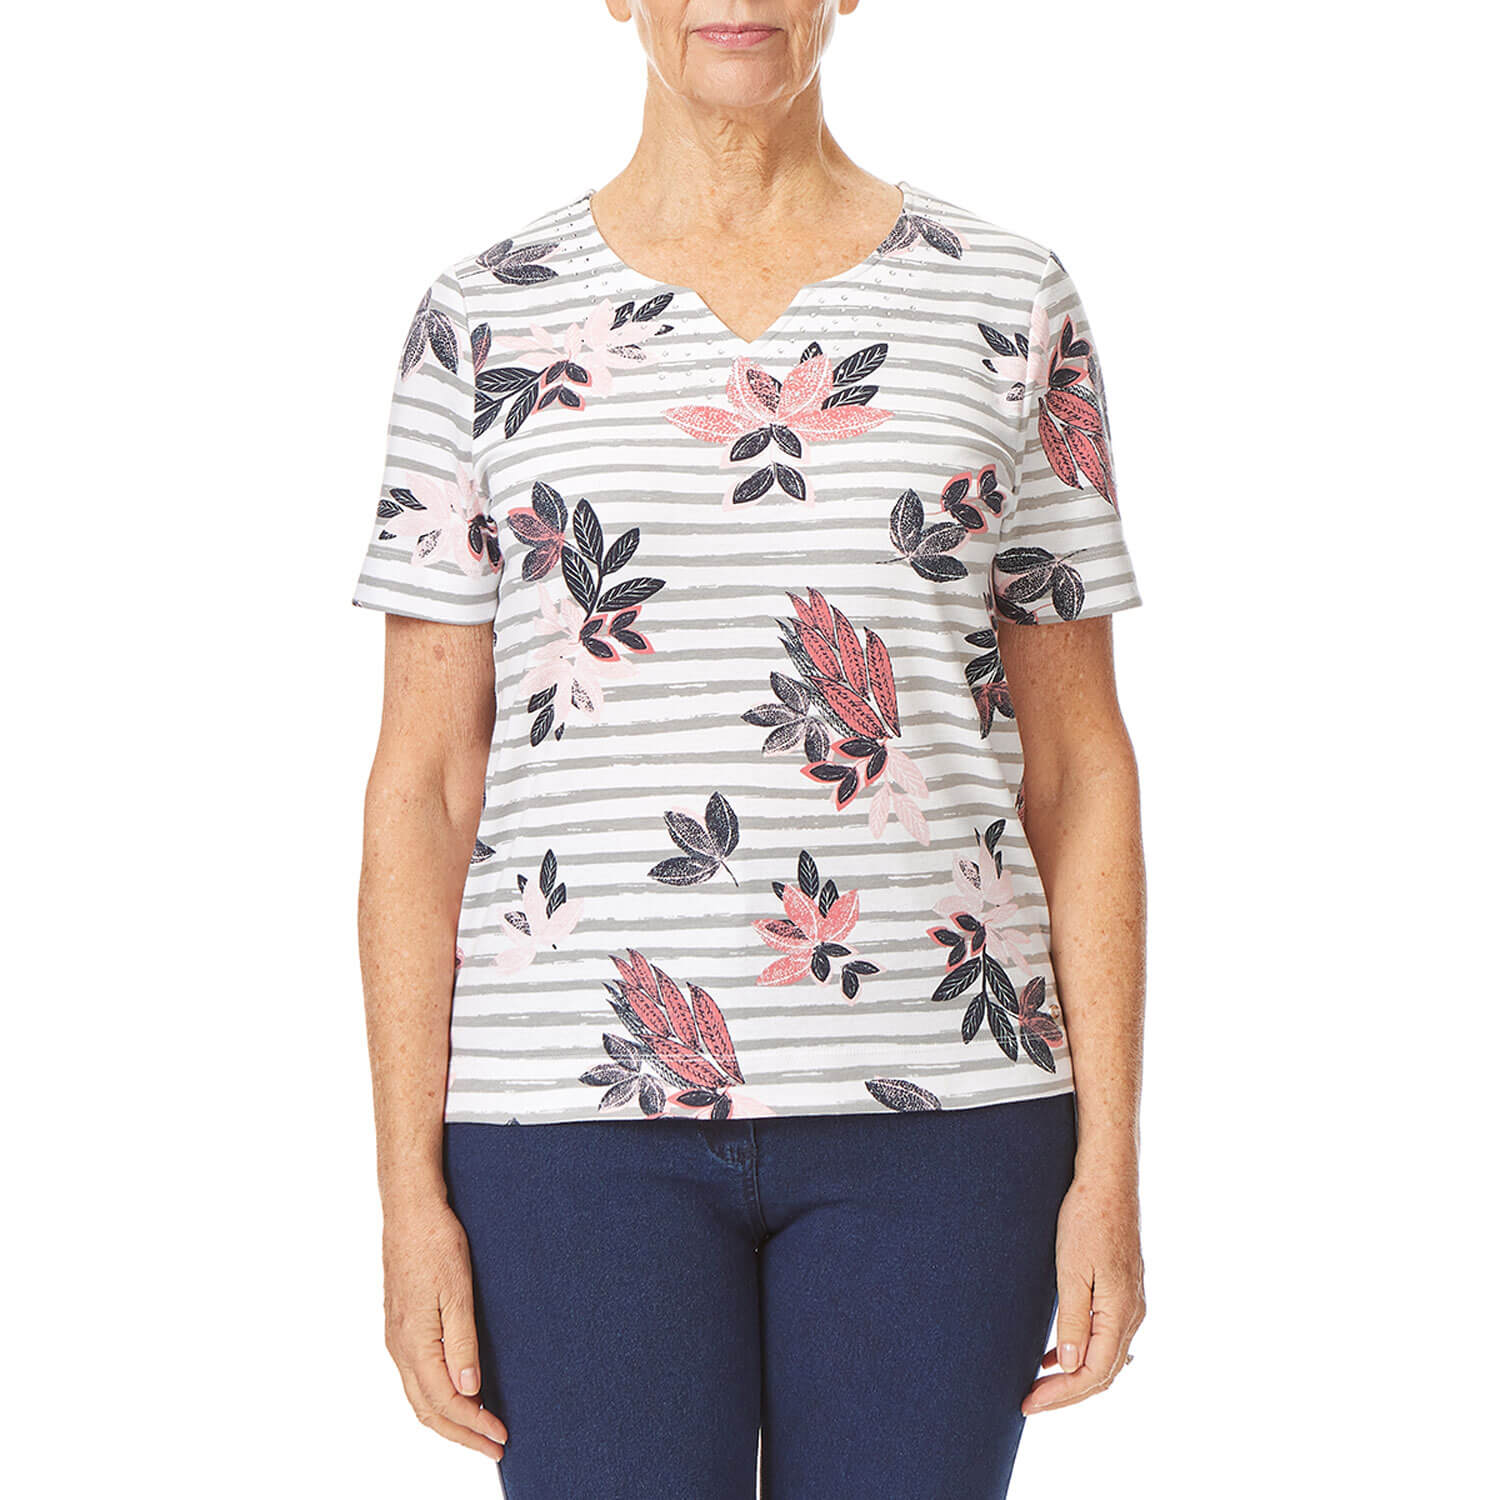 Tigiwear Notch Neck All Over Print Stripe Top 3 Shaws Department Stores